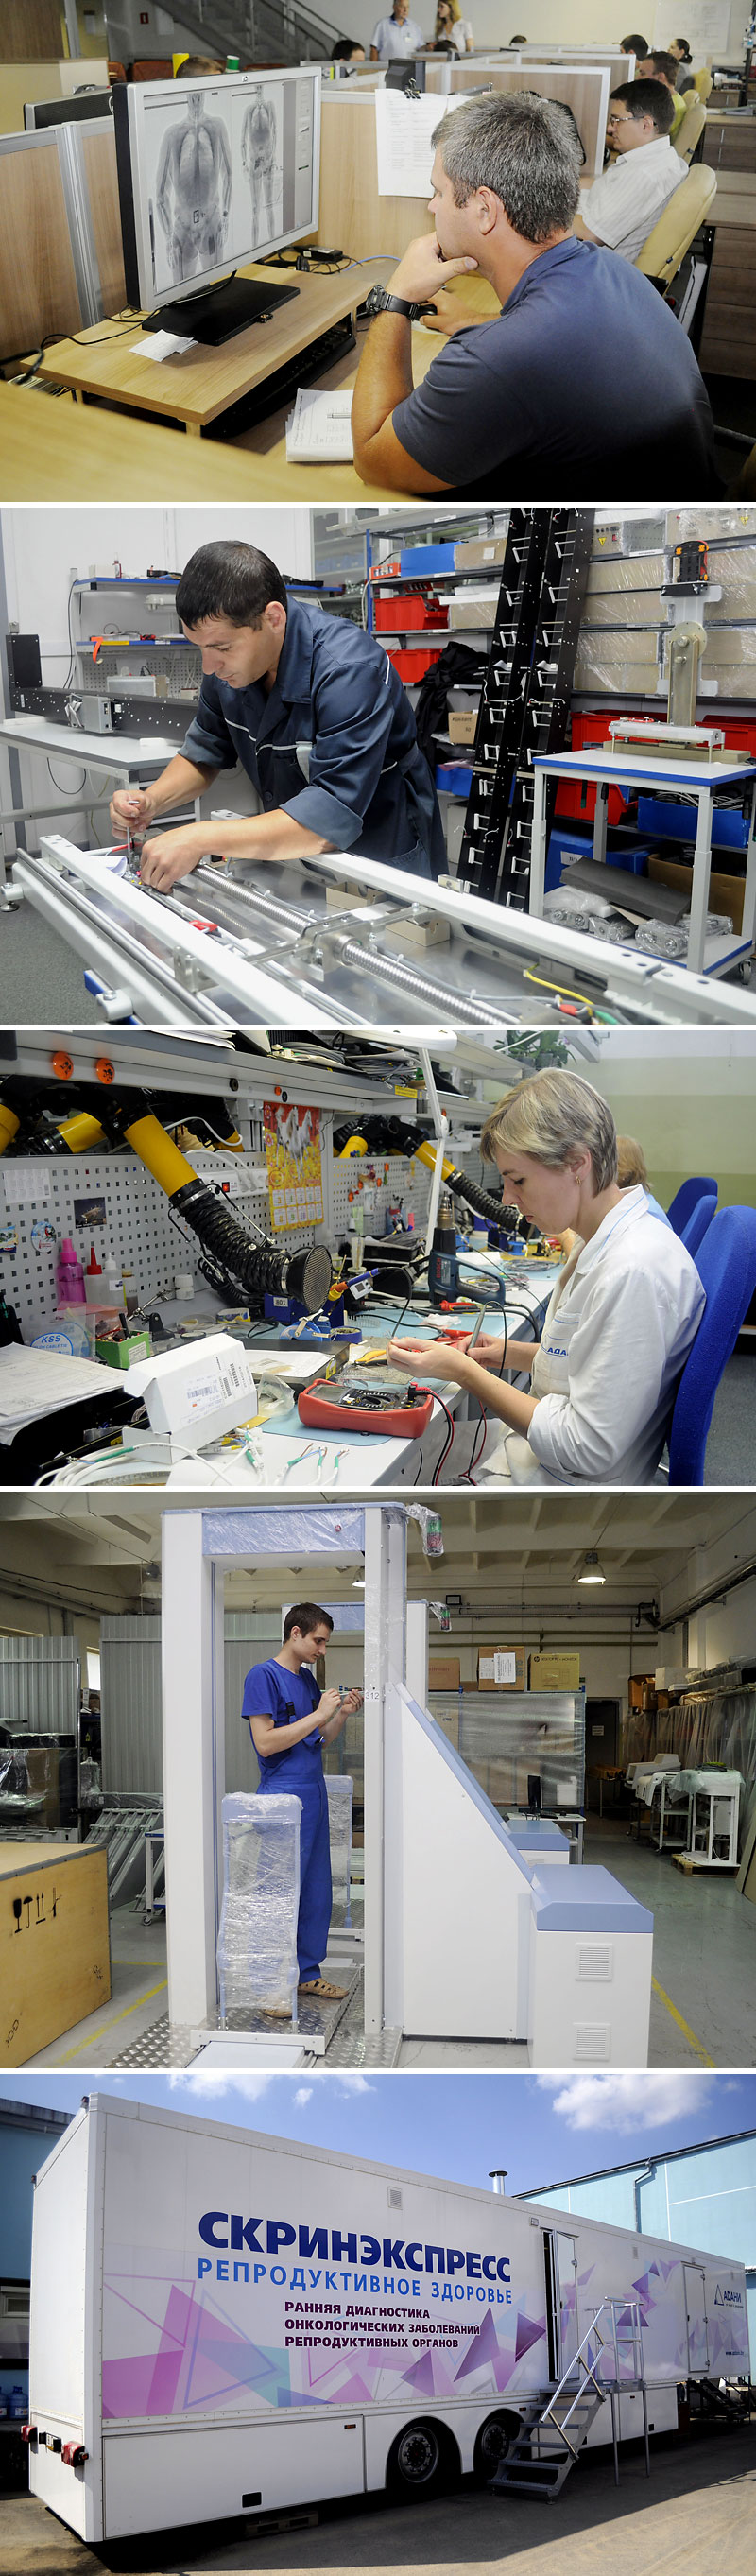 Adani, a producer of X-ray scanning equipment, a resident company of the Free economic Zone Minsk